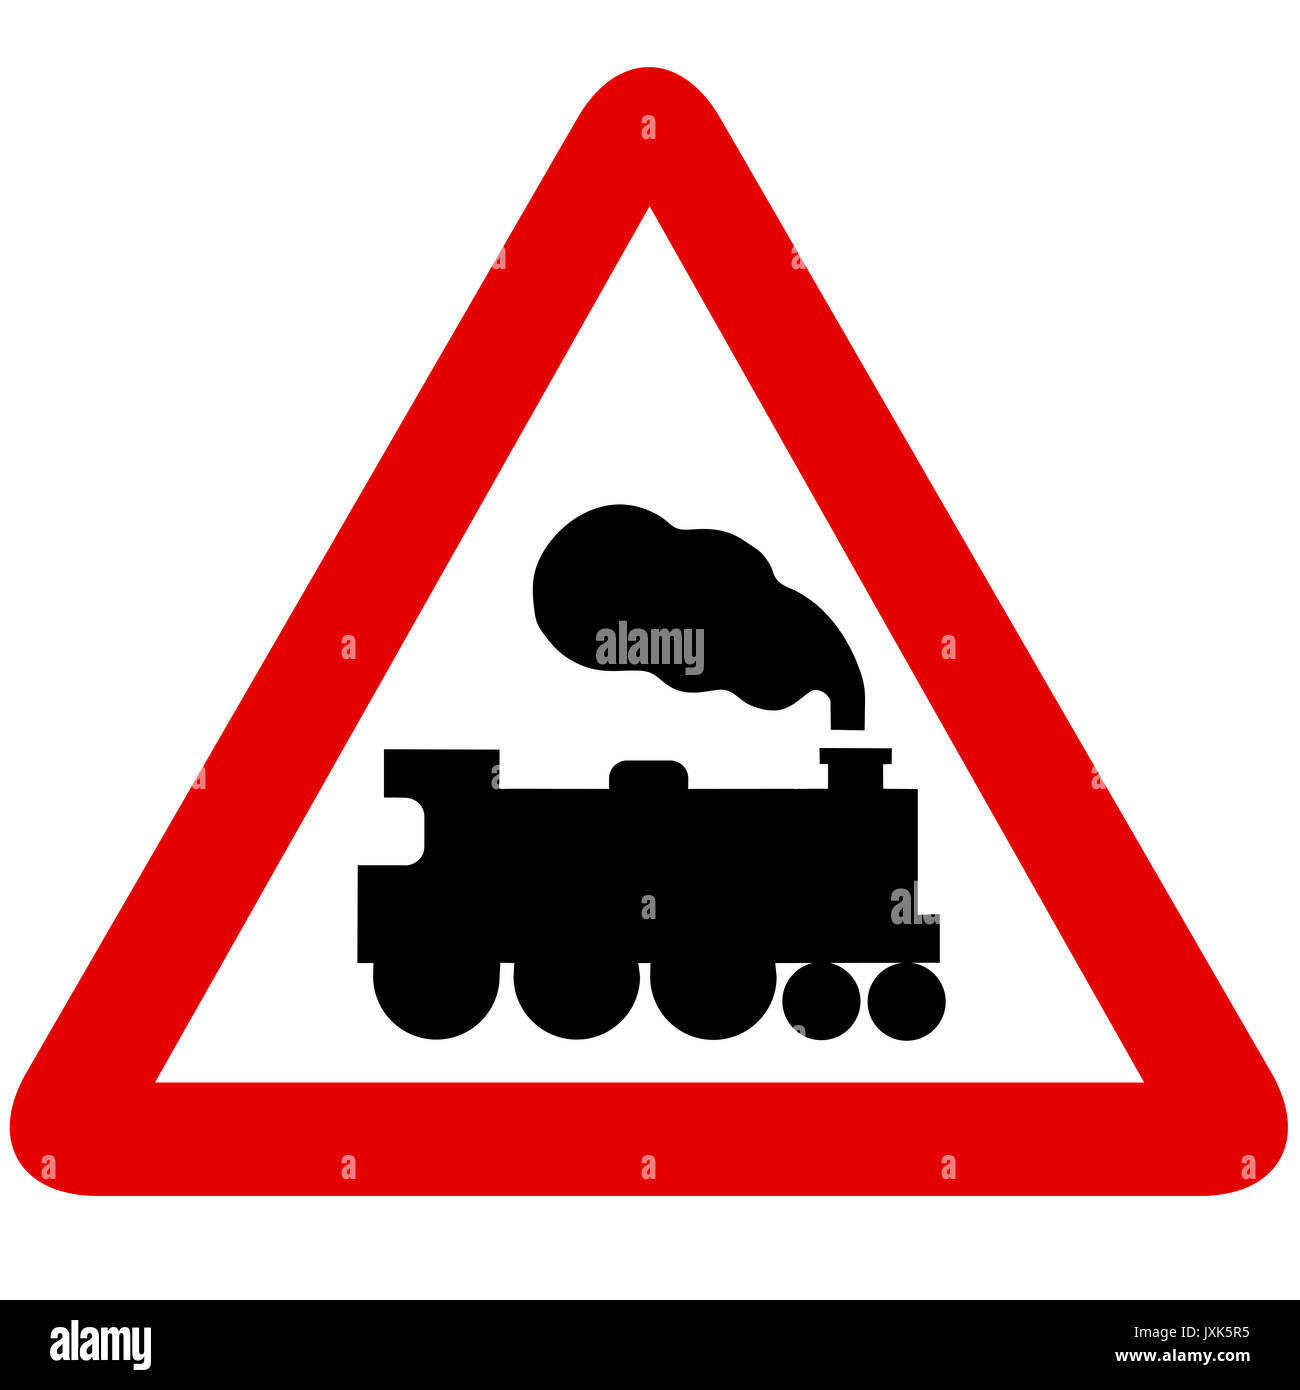 Level Crossing Without Barrier Or Gate Ahead Road Sign On White Background Stock Photo Alamy